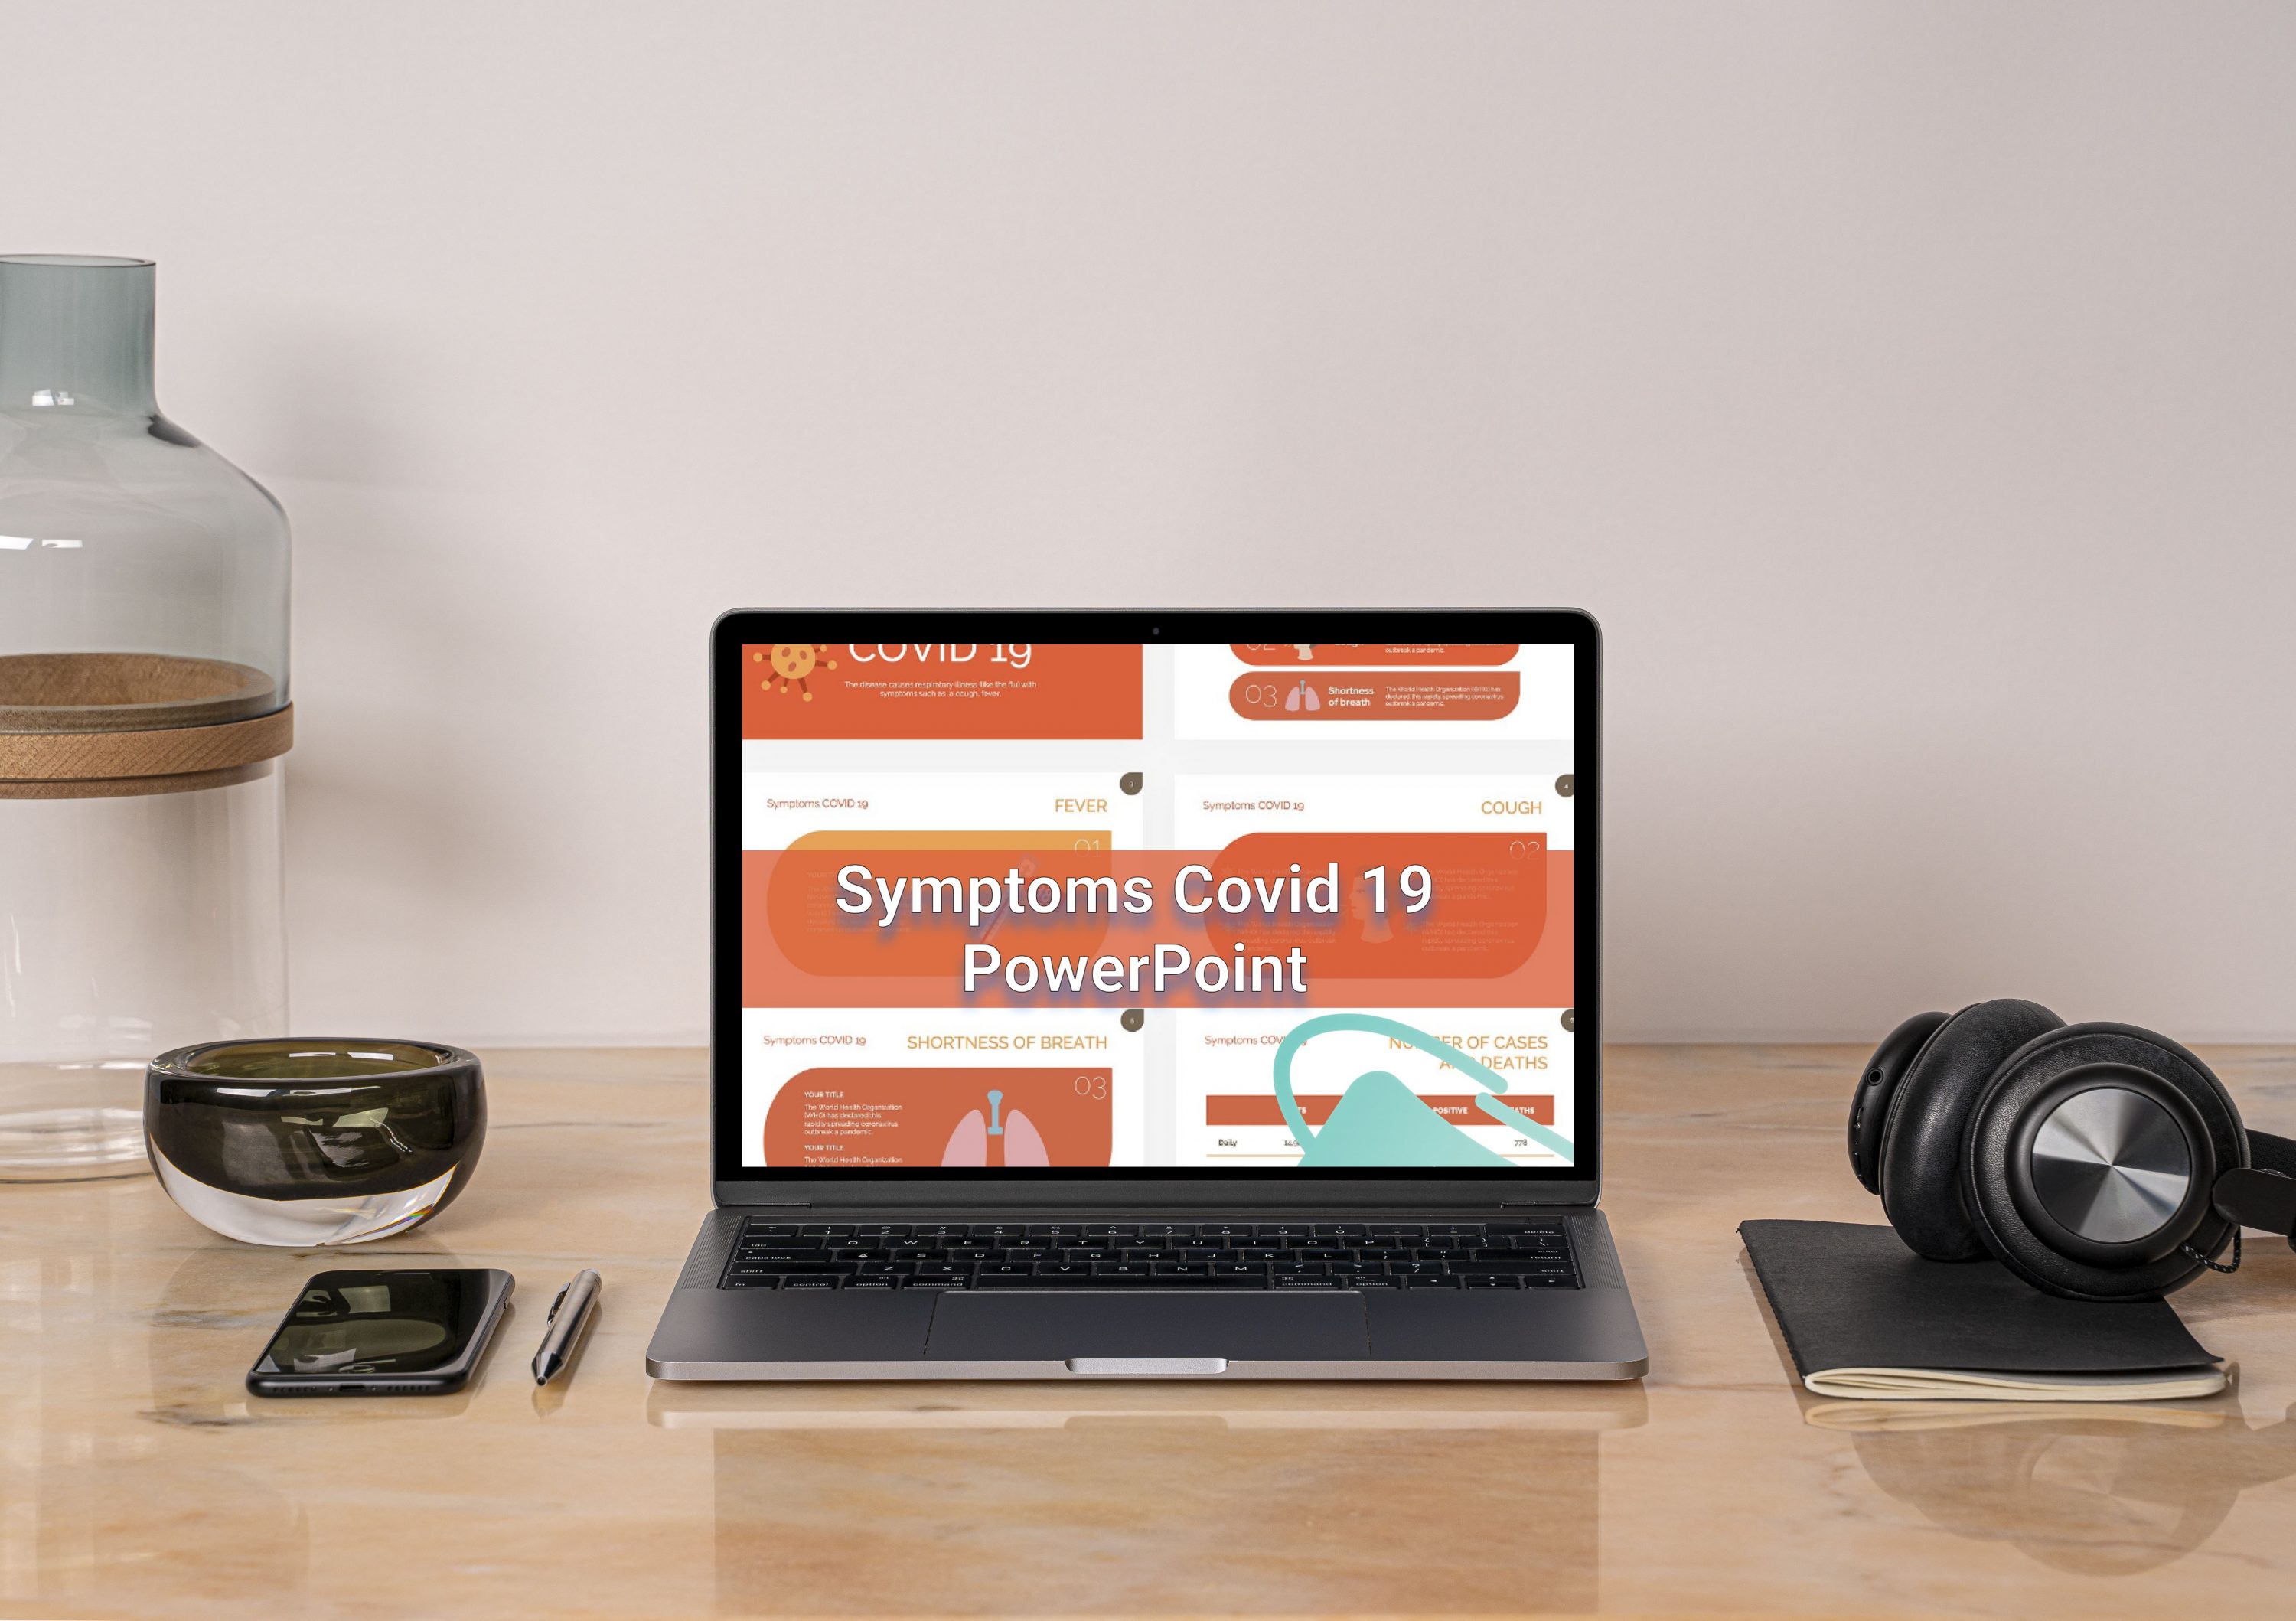 Laptop option of the Symptoms Covid 19 PowerPoint.